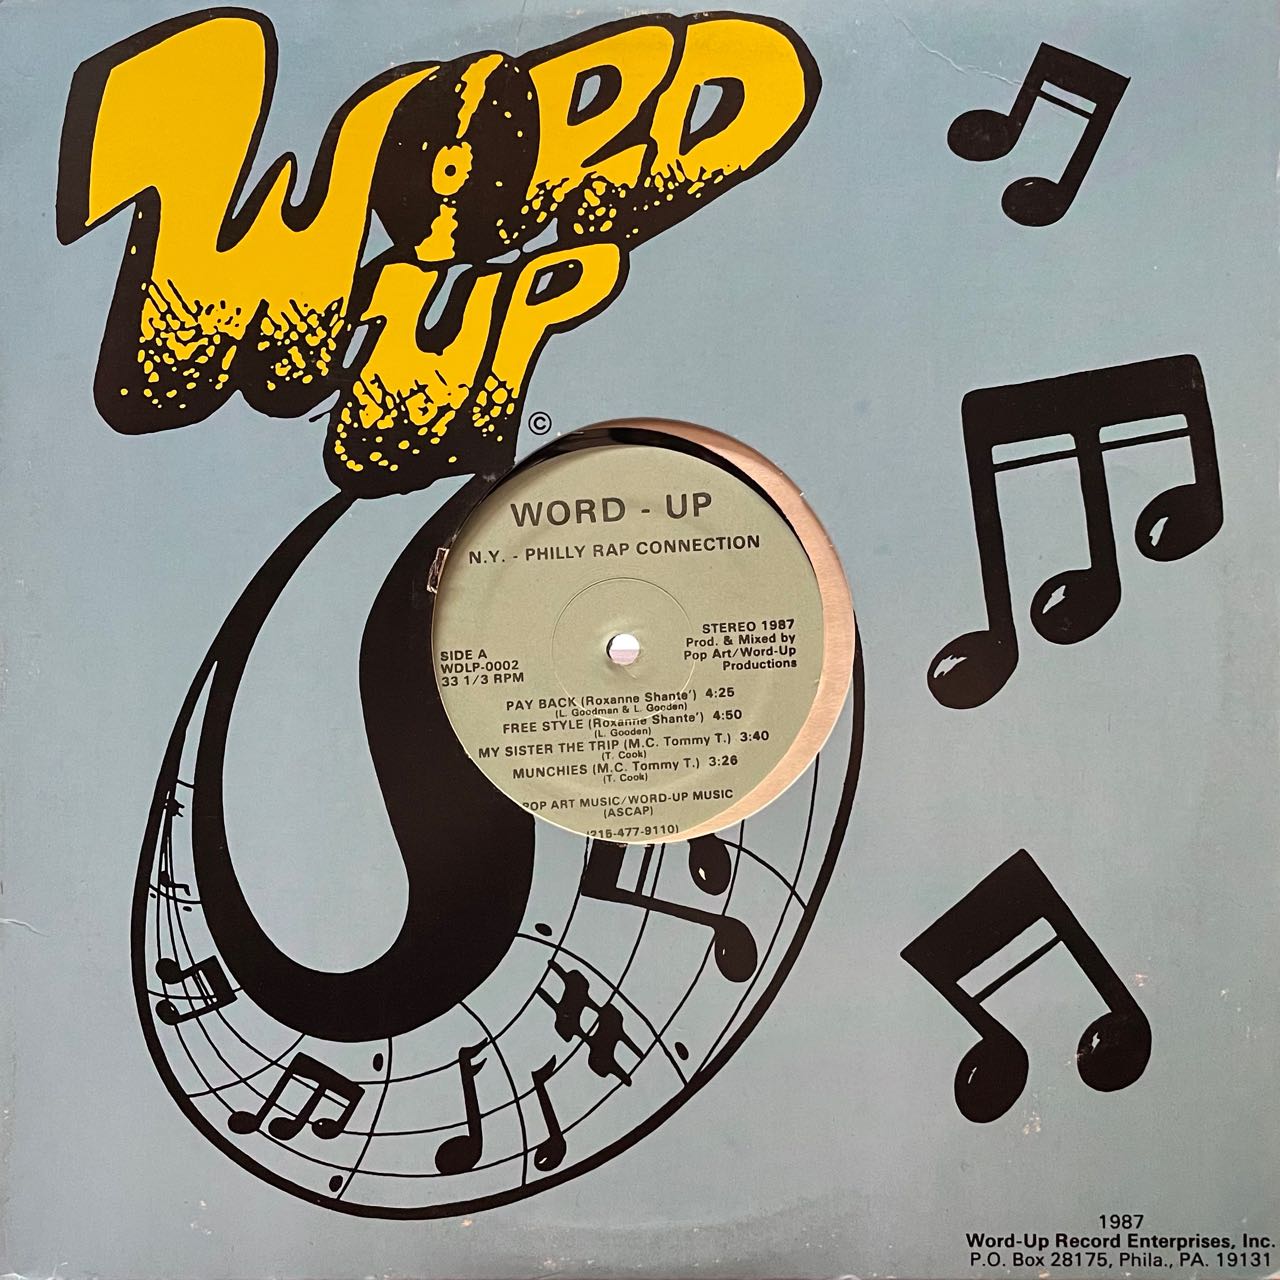 N.Y. - PHILLY RAP CONNECTION/V.A (D.J. GROOVE)/中古レコード通販 ...